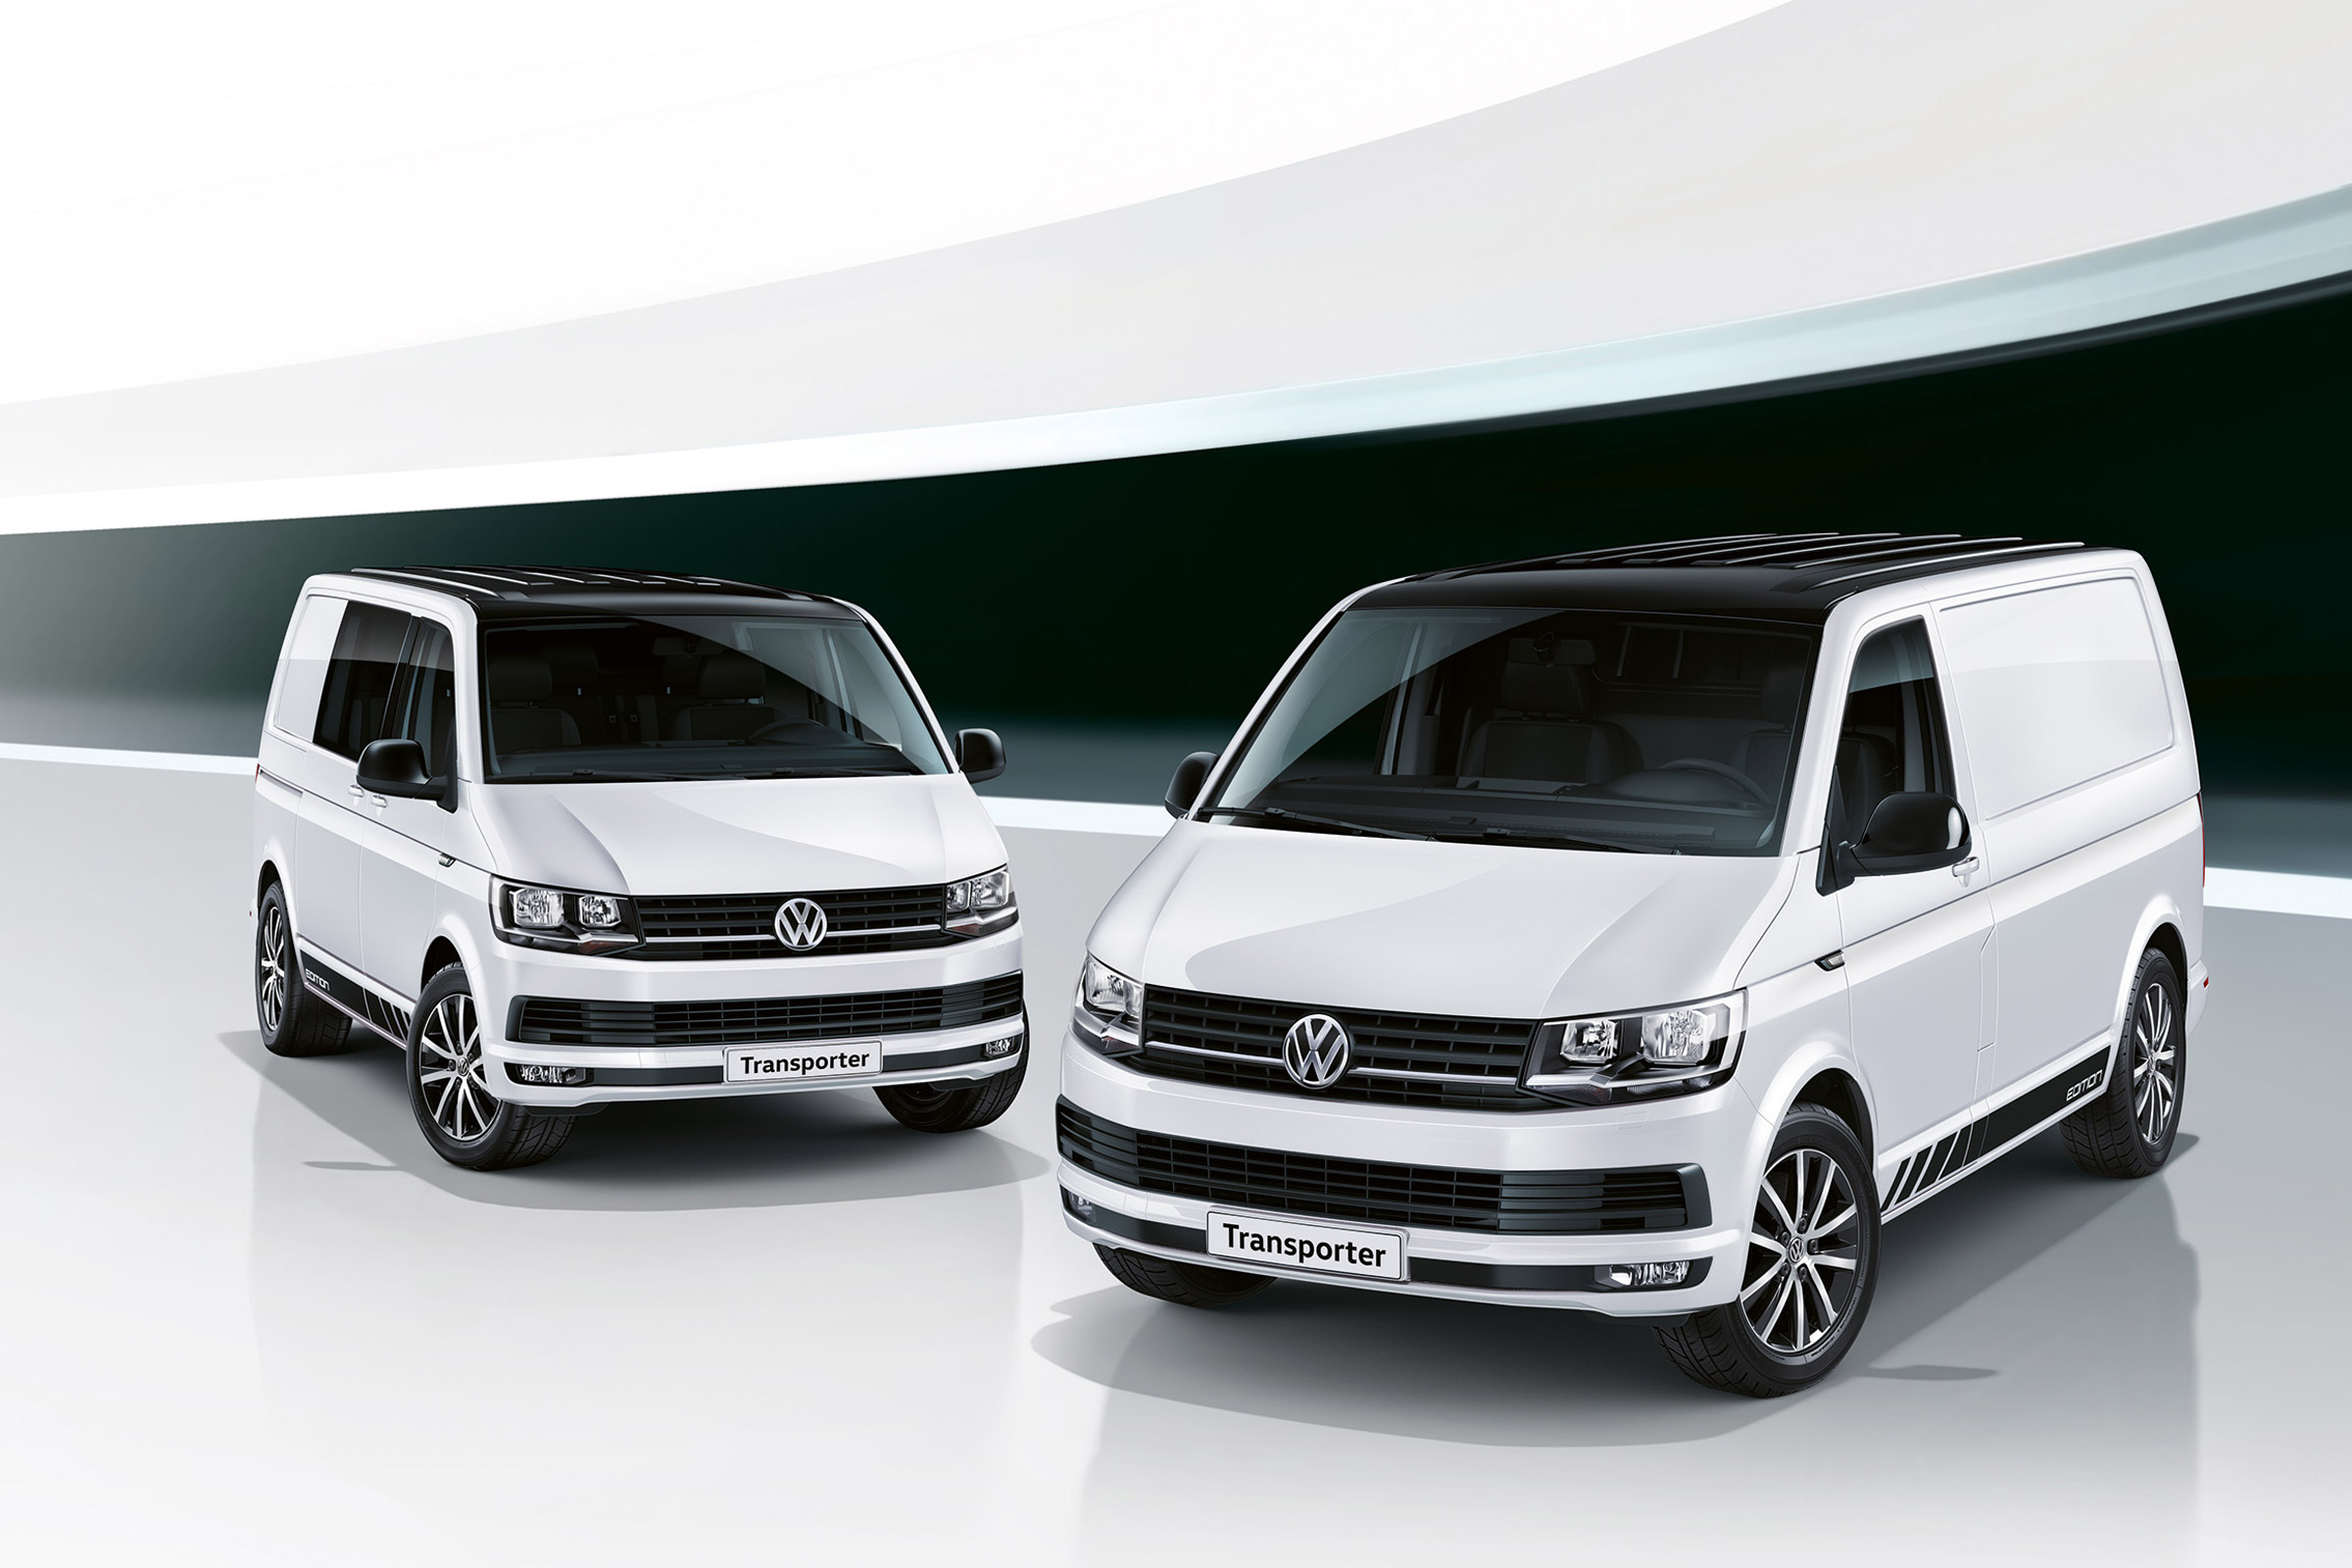 Fully-loaded new VW Transporter Edition model pushes panel 